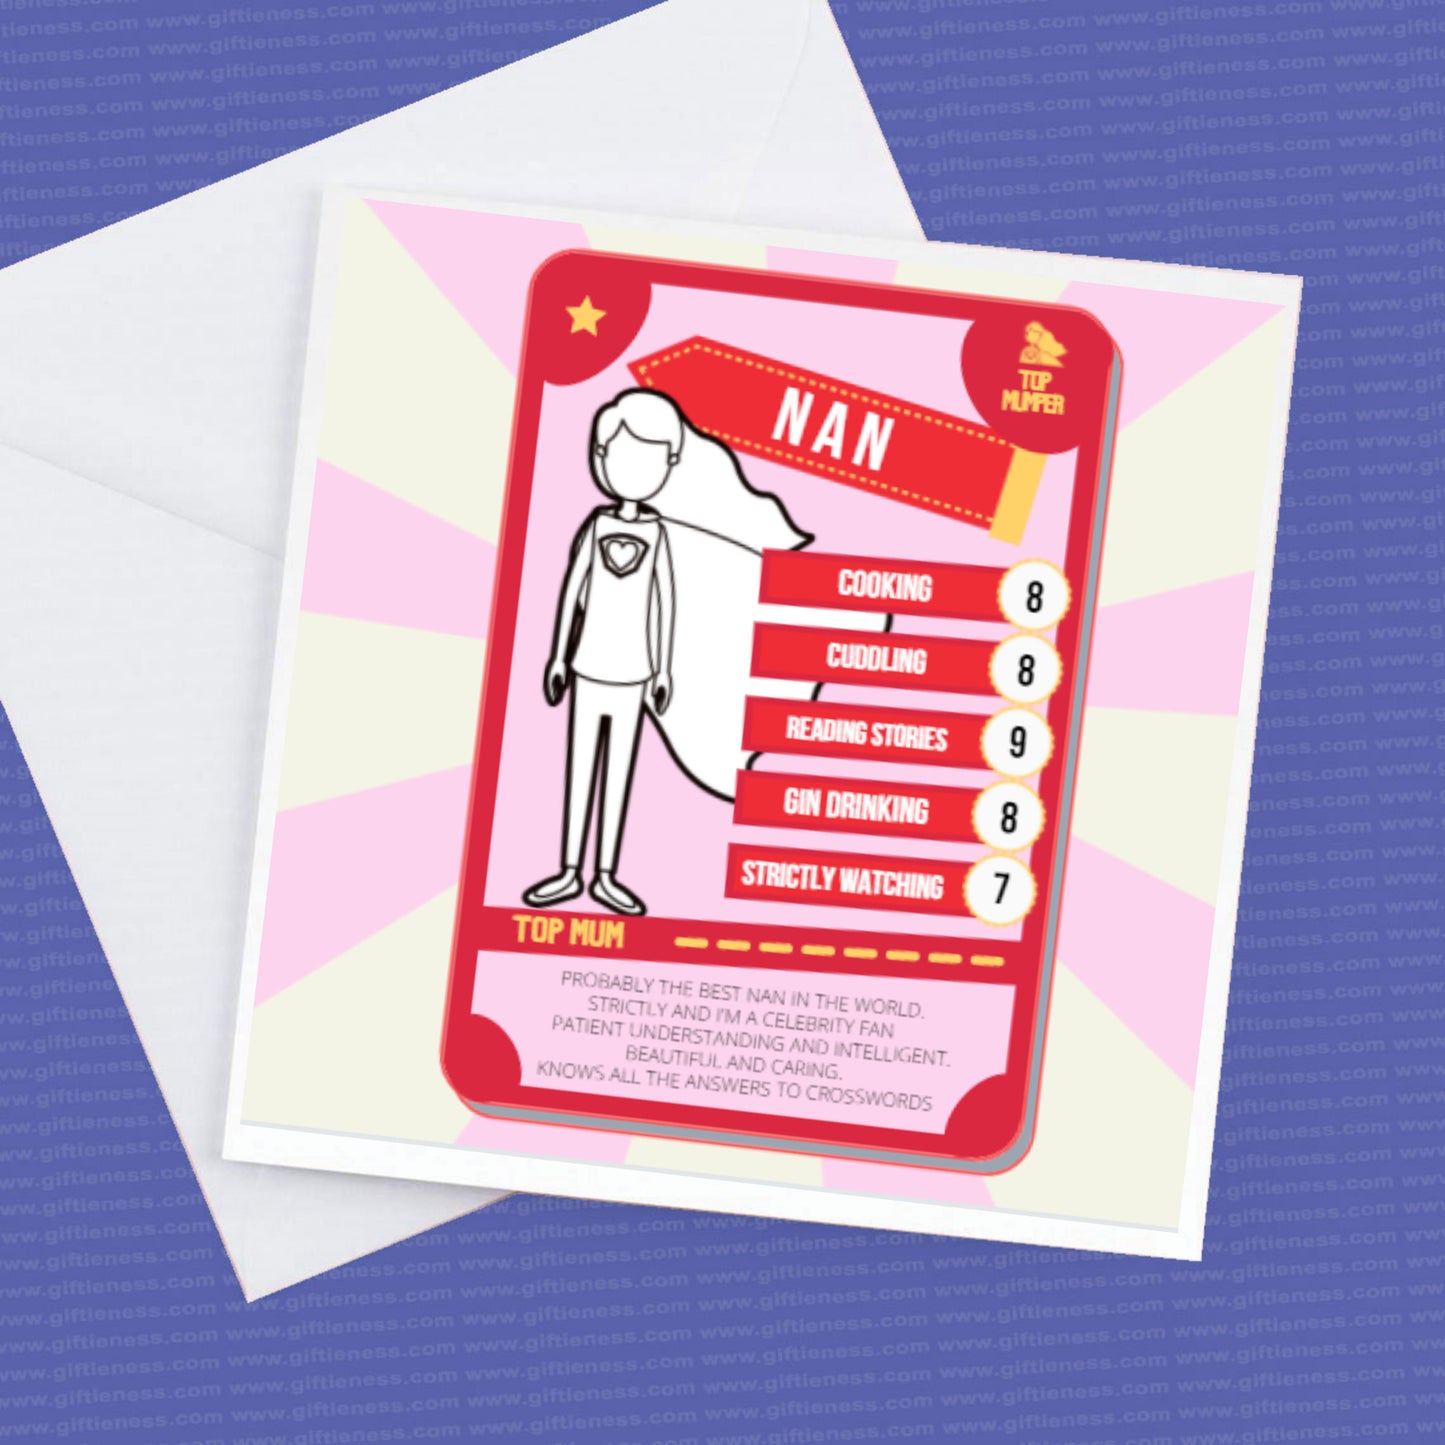 Personalised Top Card - name and your bullet points and scores all changeable